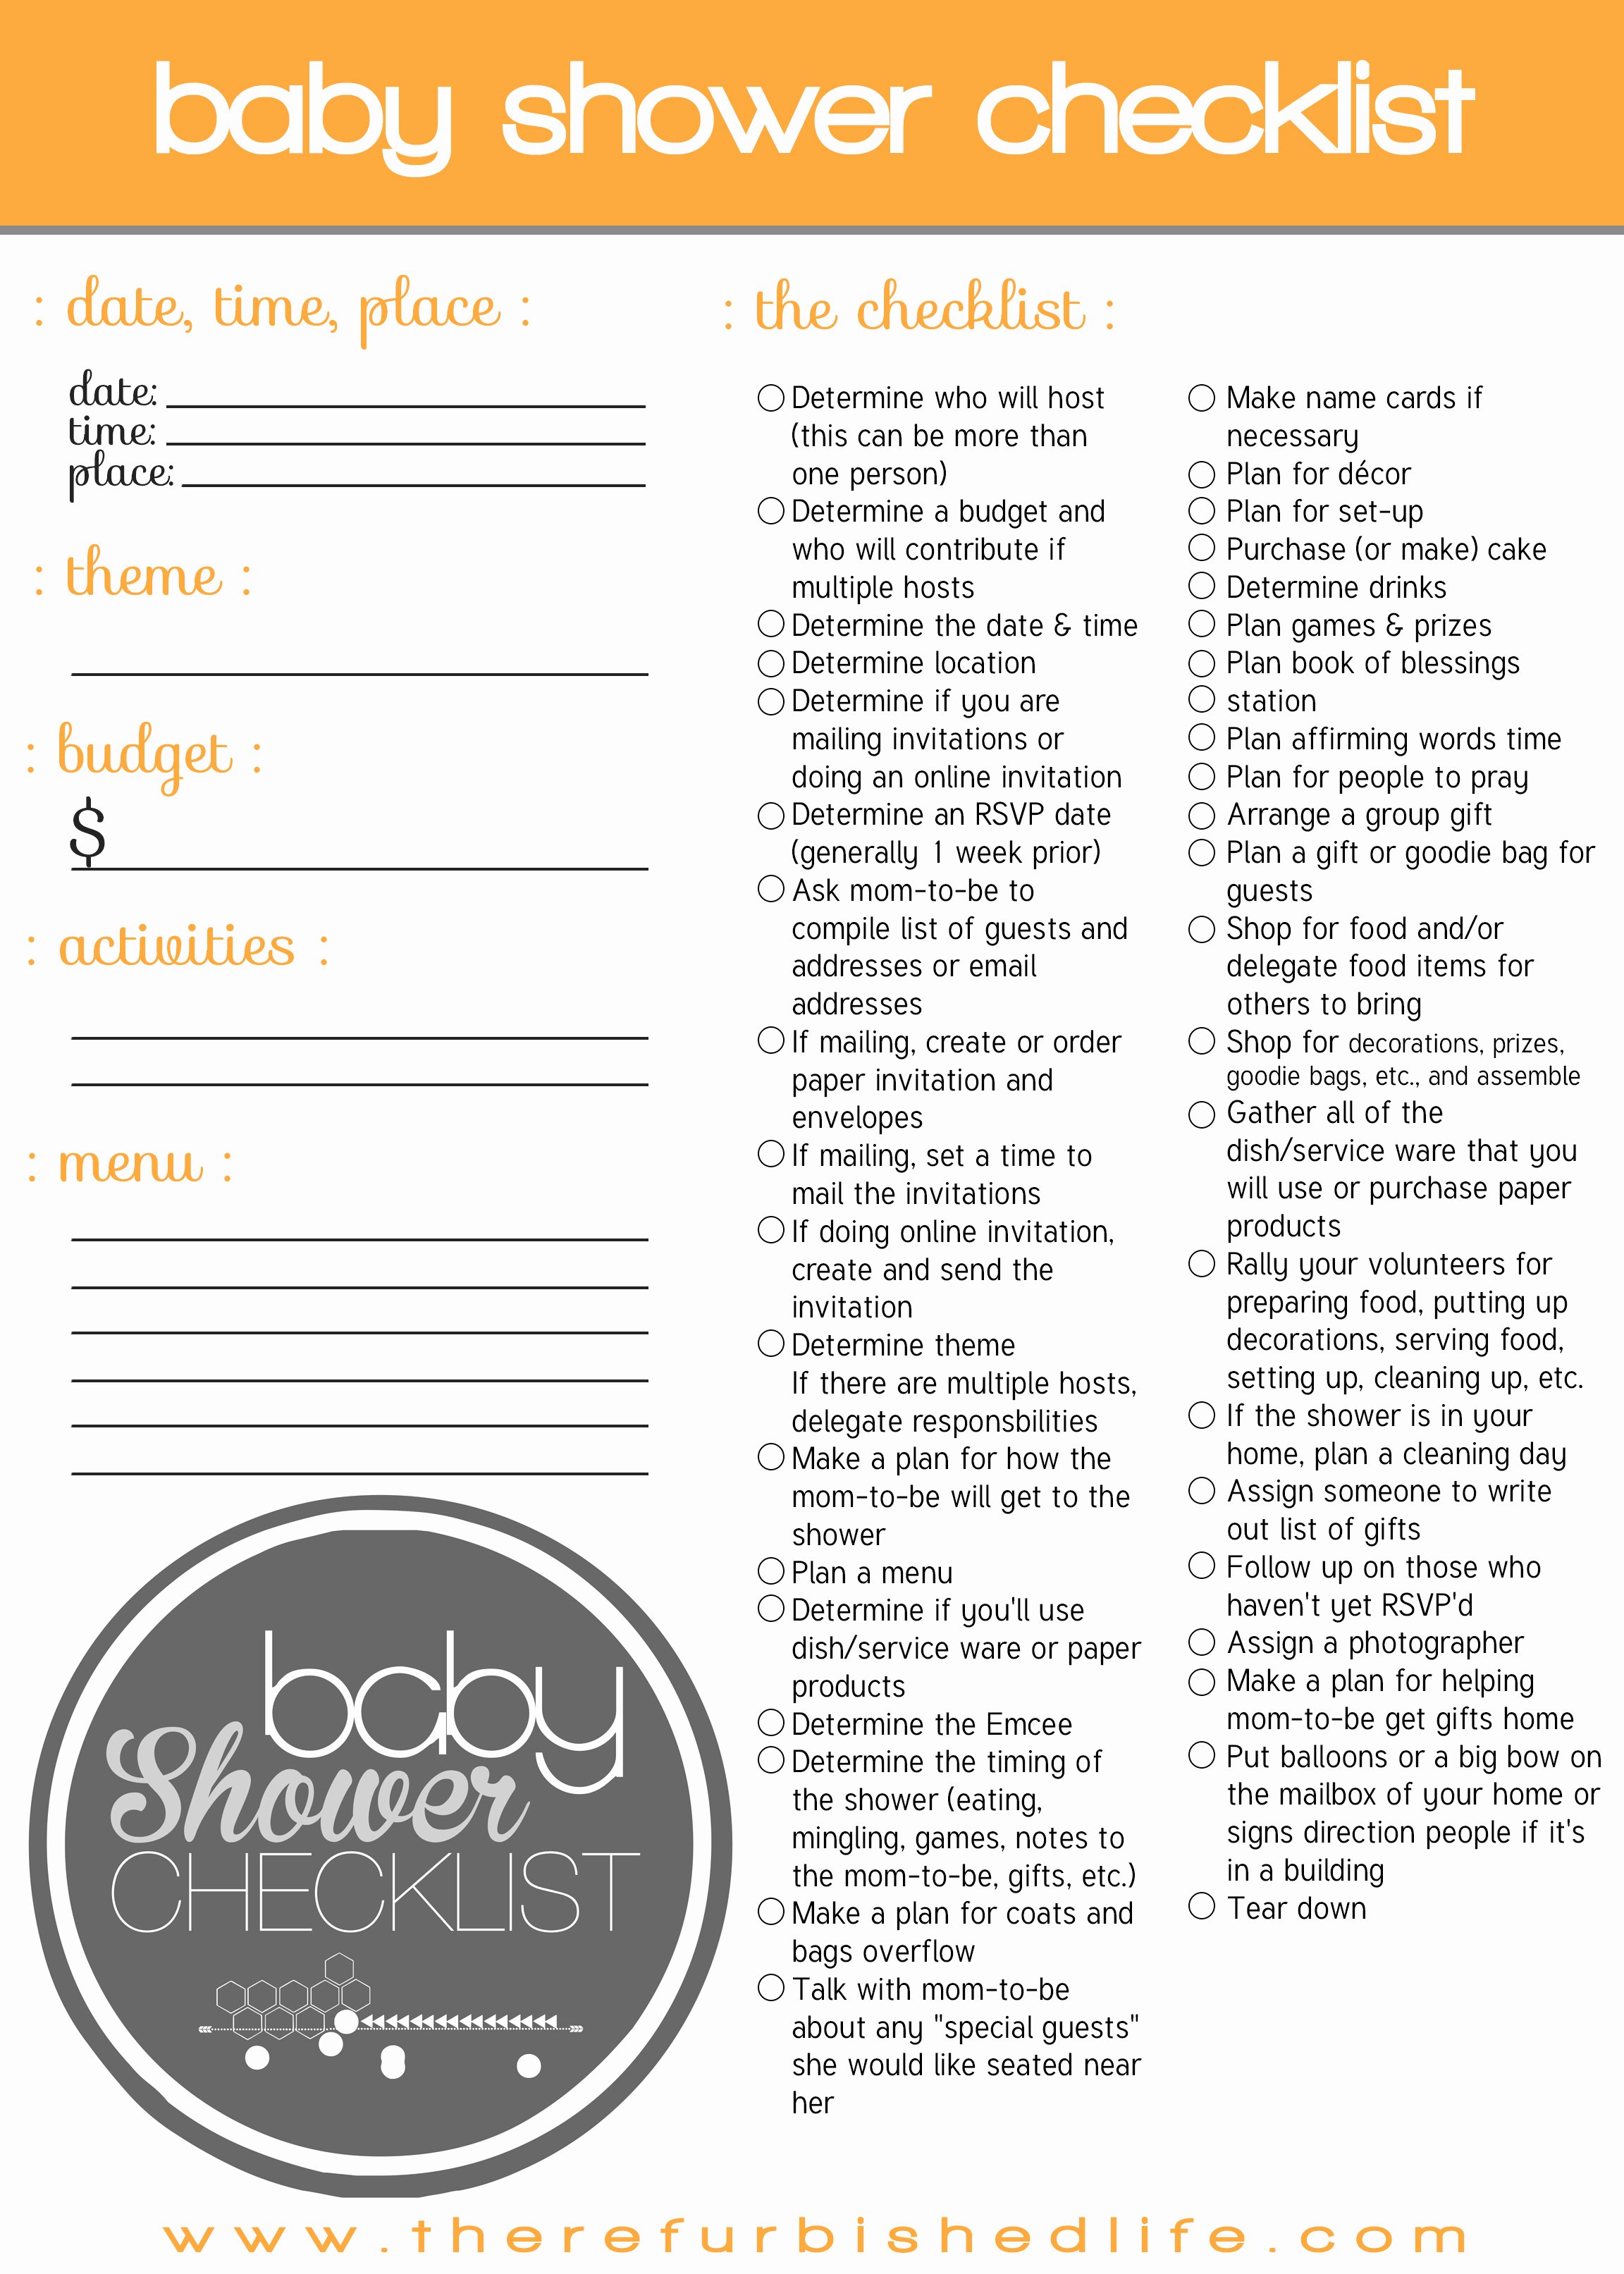 Baby Shower Planning Checklist Awesome Plete Baby Shower Checklist Free Printable